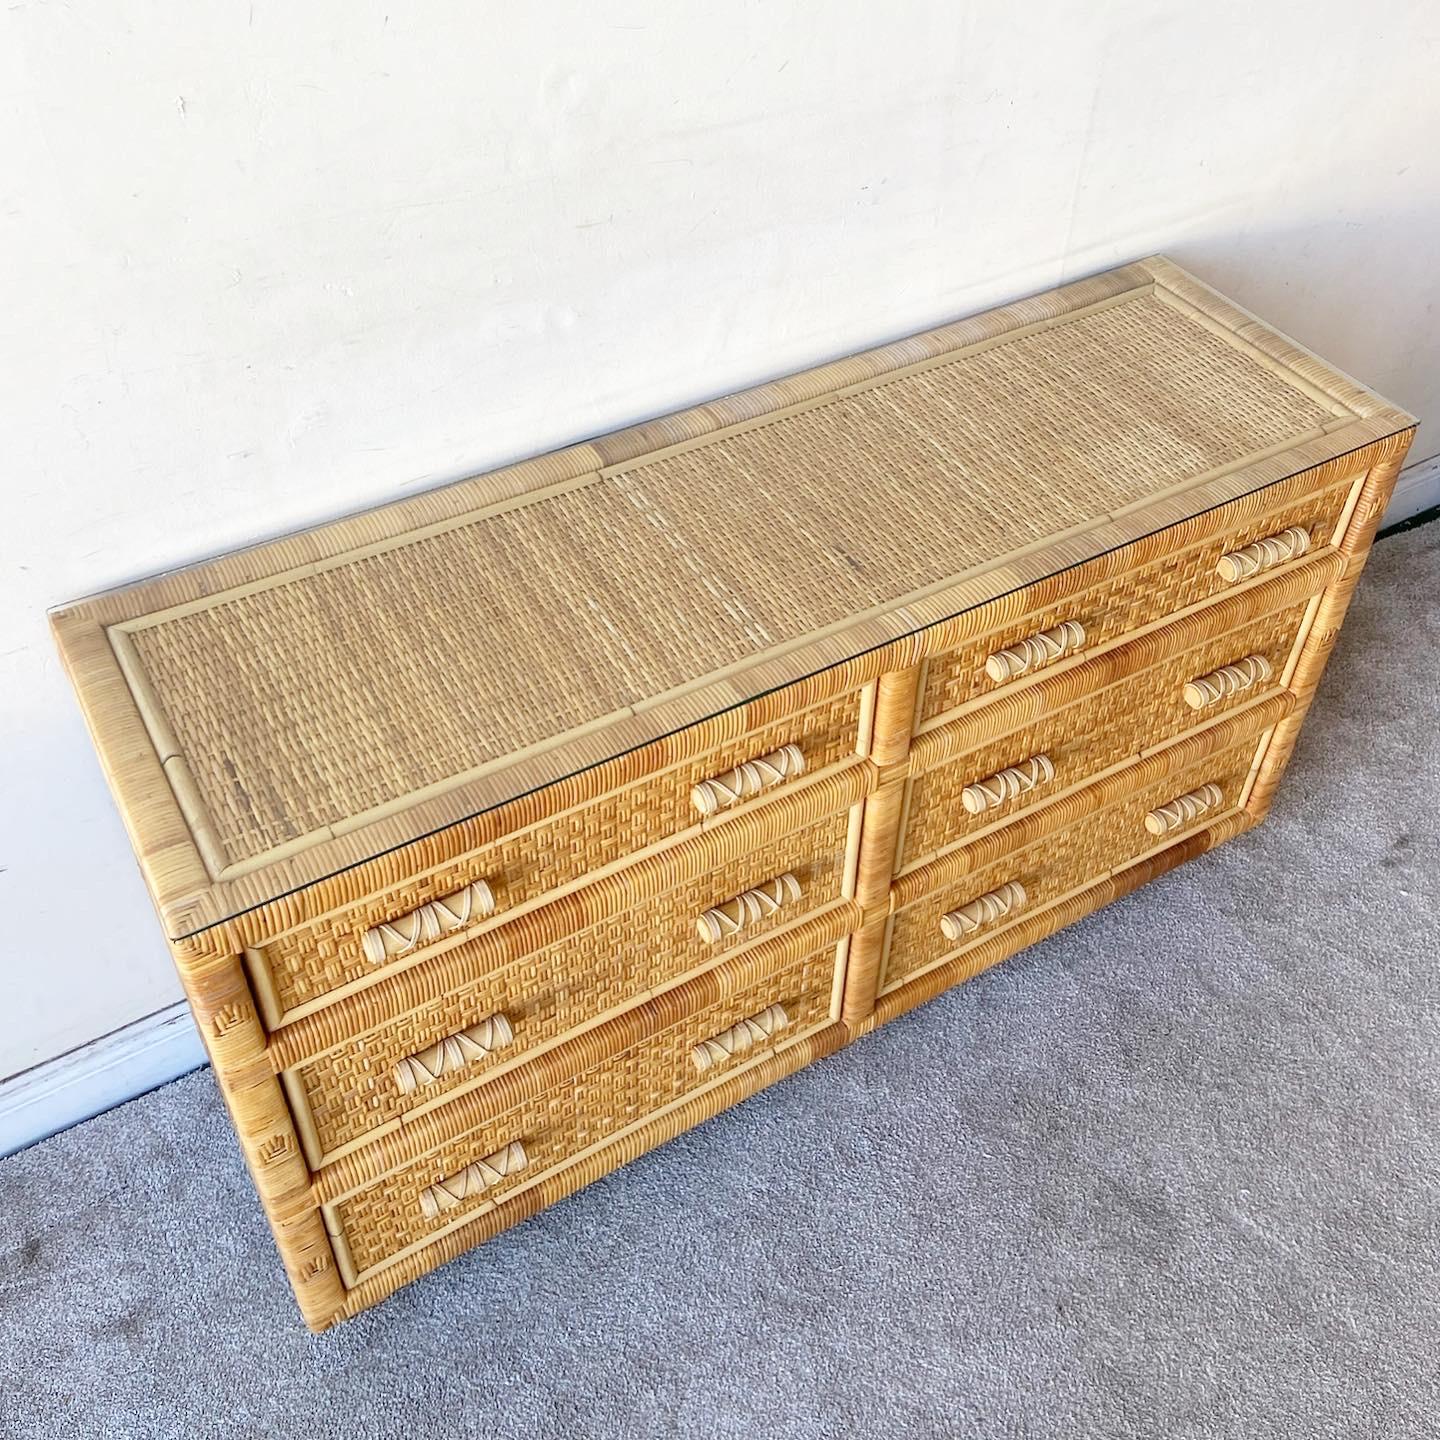 Excellent vintage bohemian dresser with a glass top. Features a rattan frame and wicker panels throughout.
 